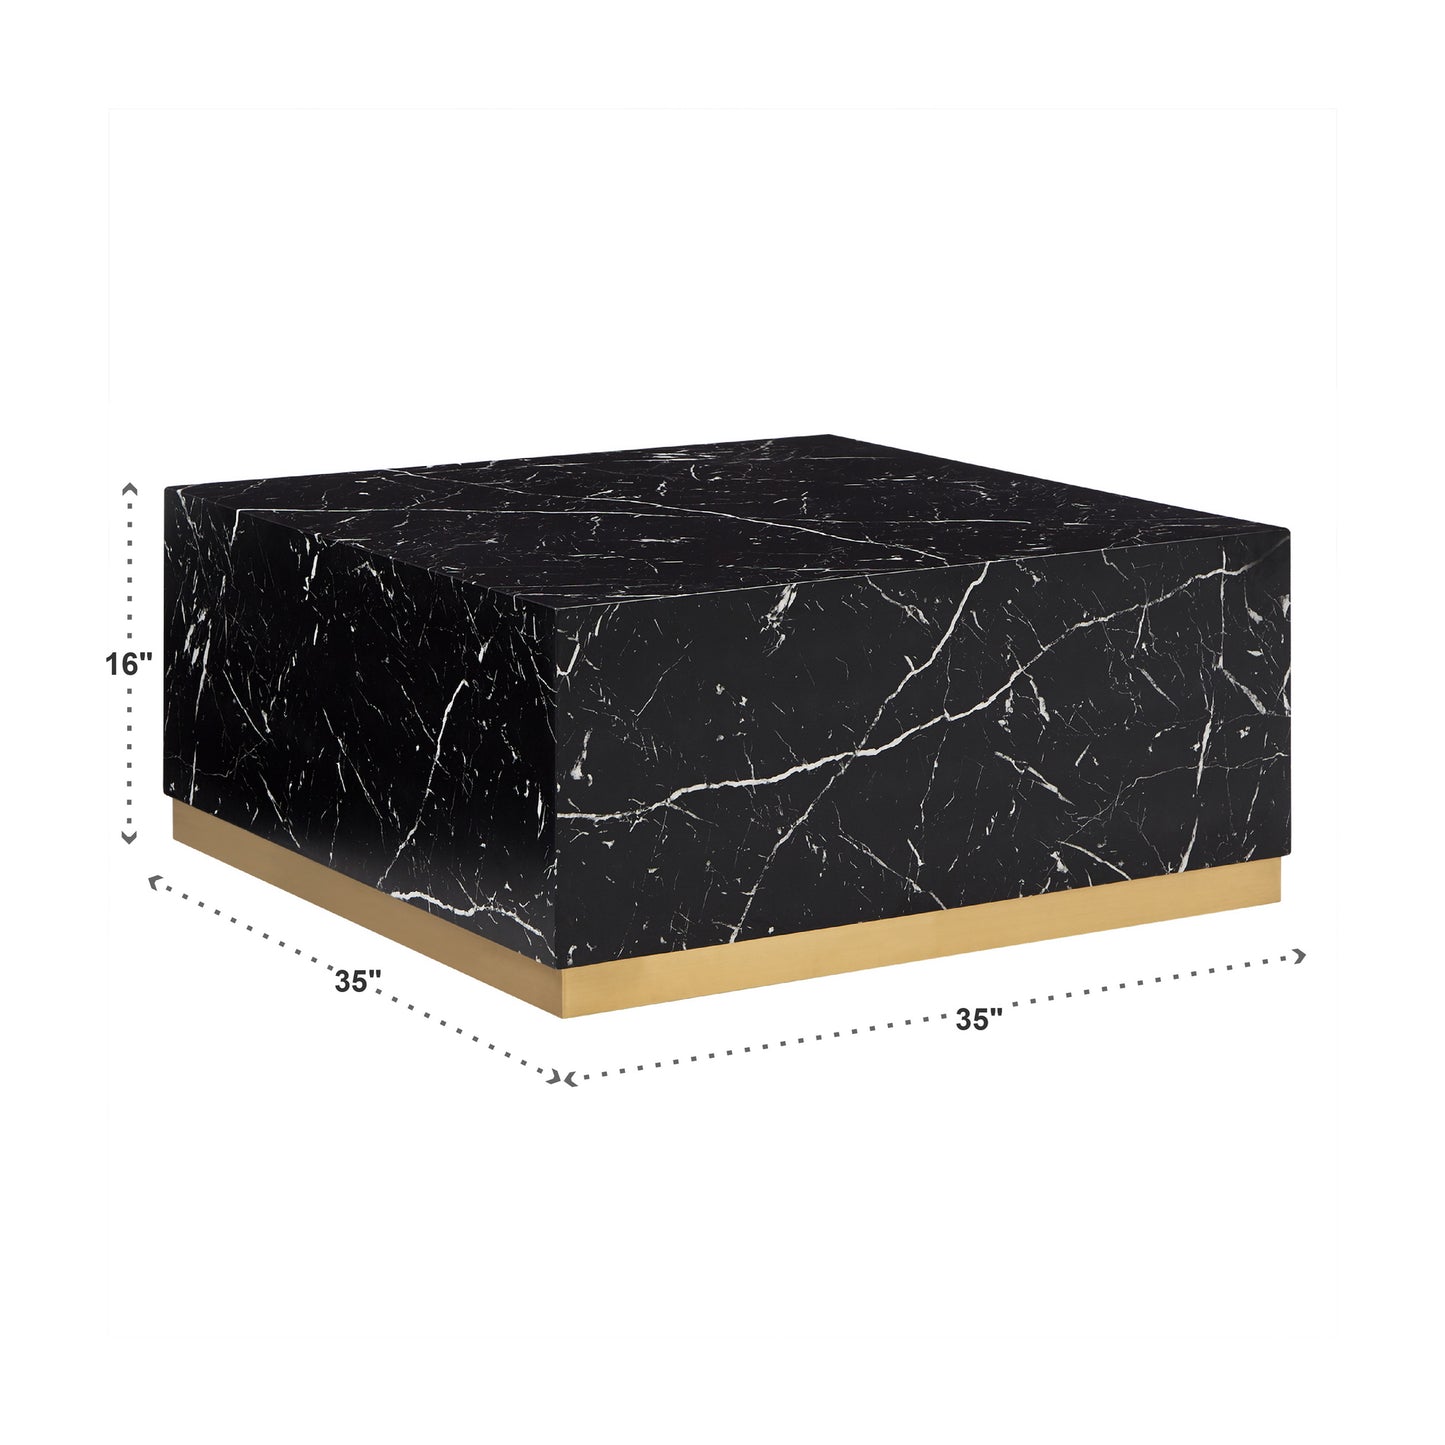 Faux Marble Coffee Table with Casters - Black, Large Square